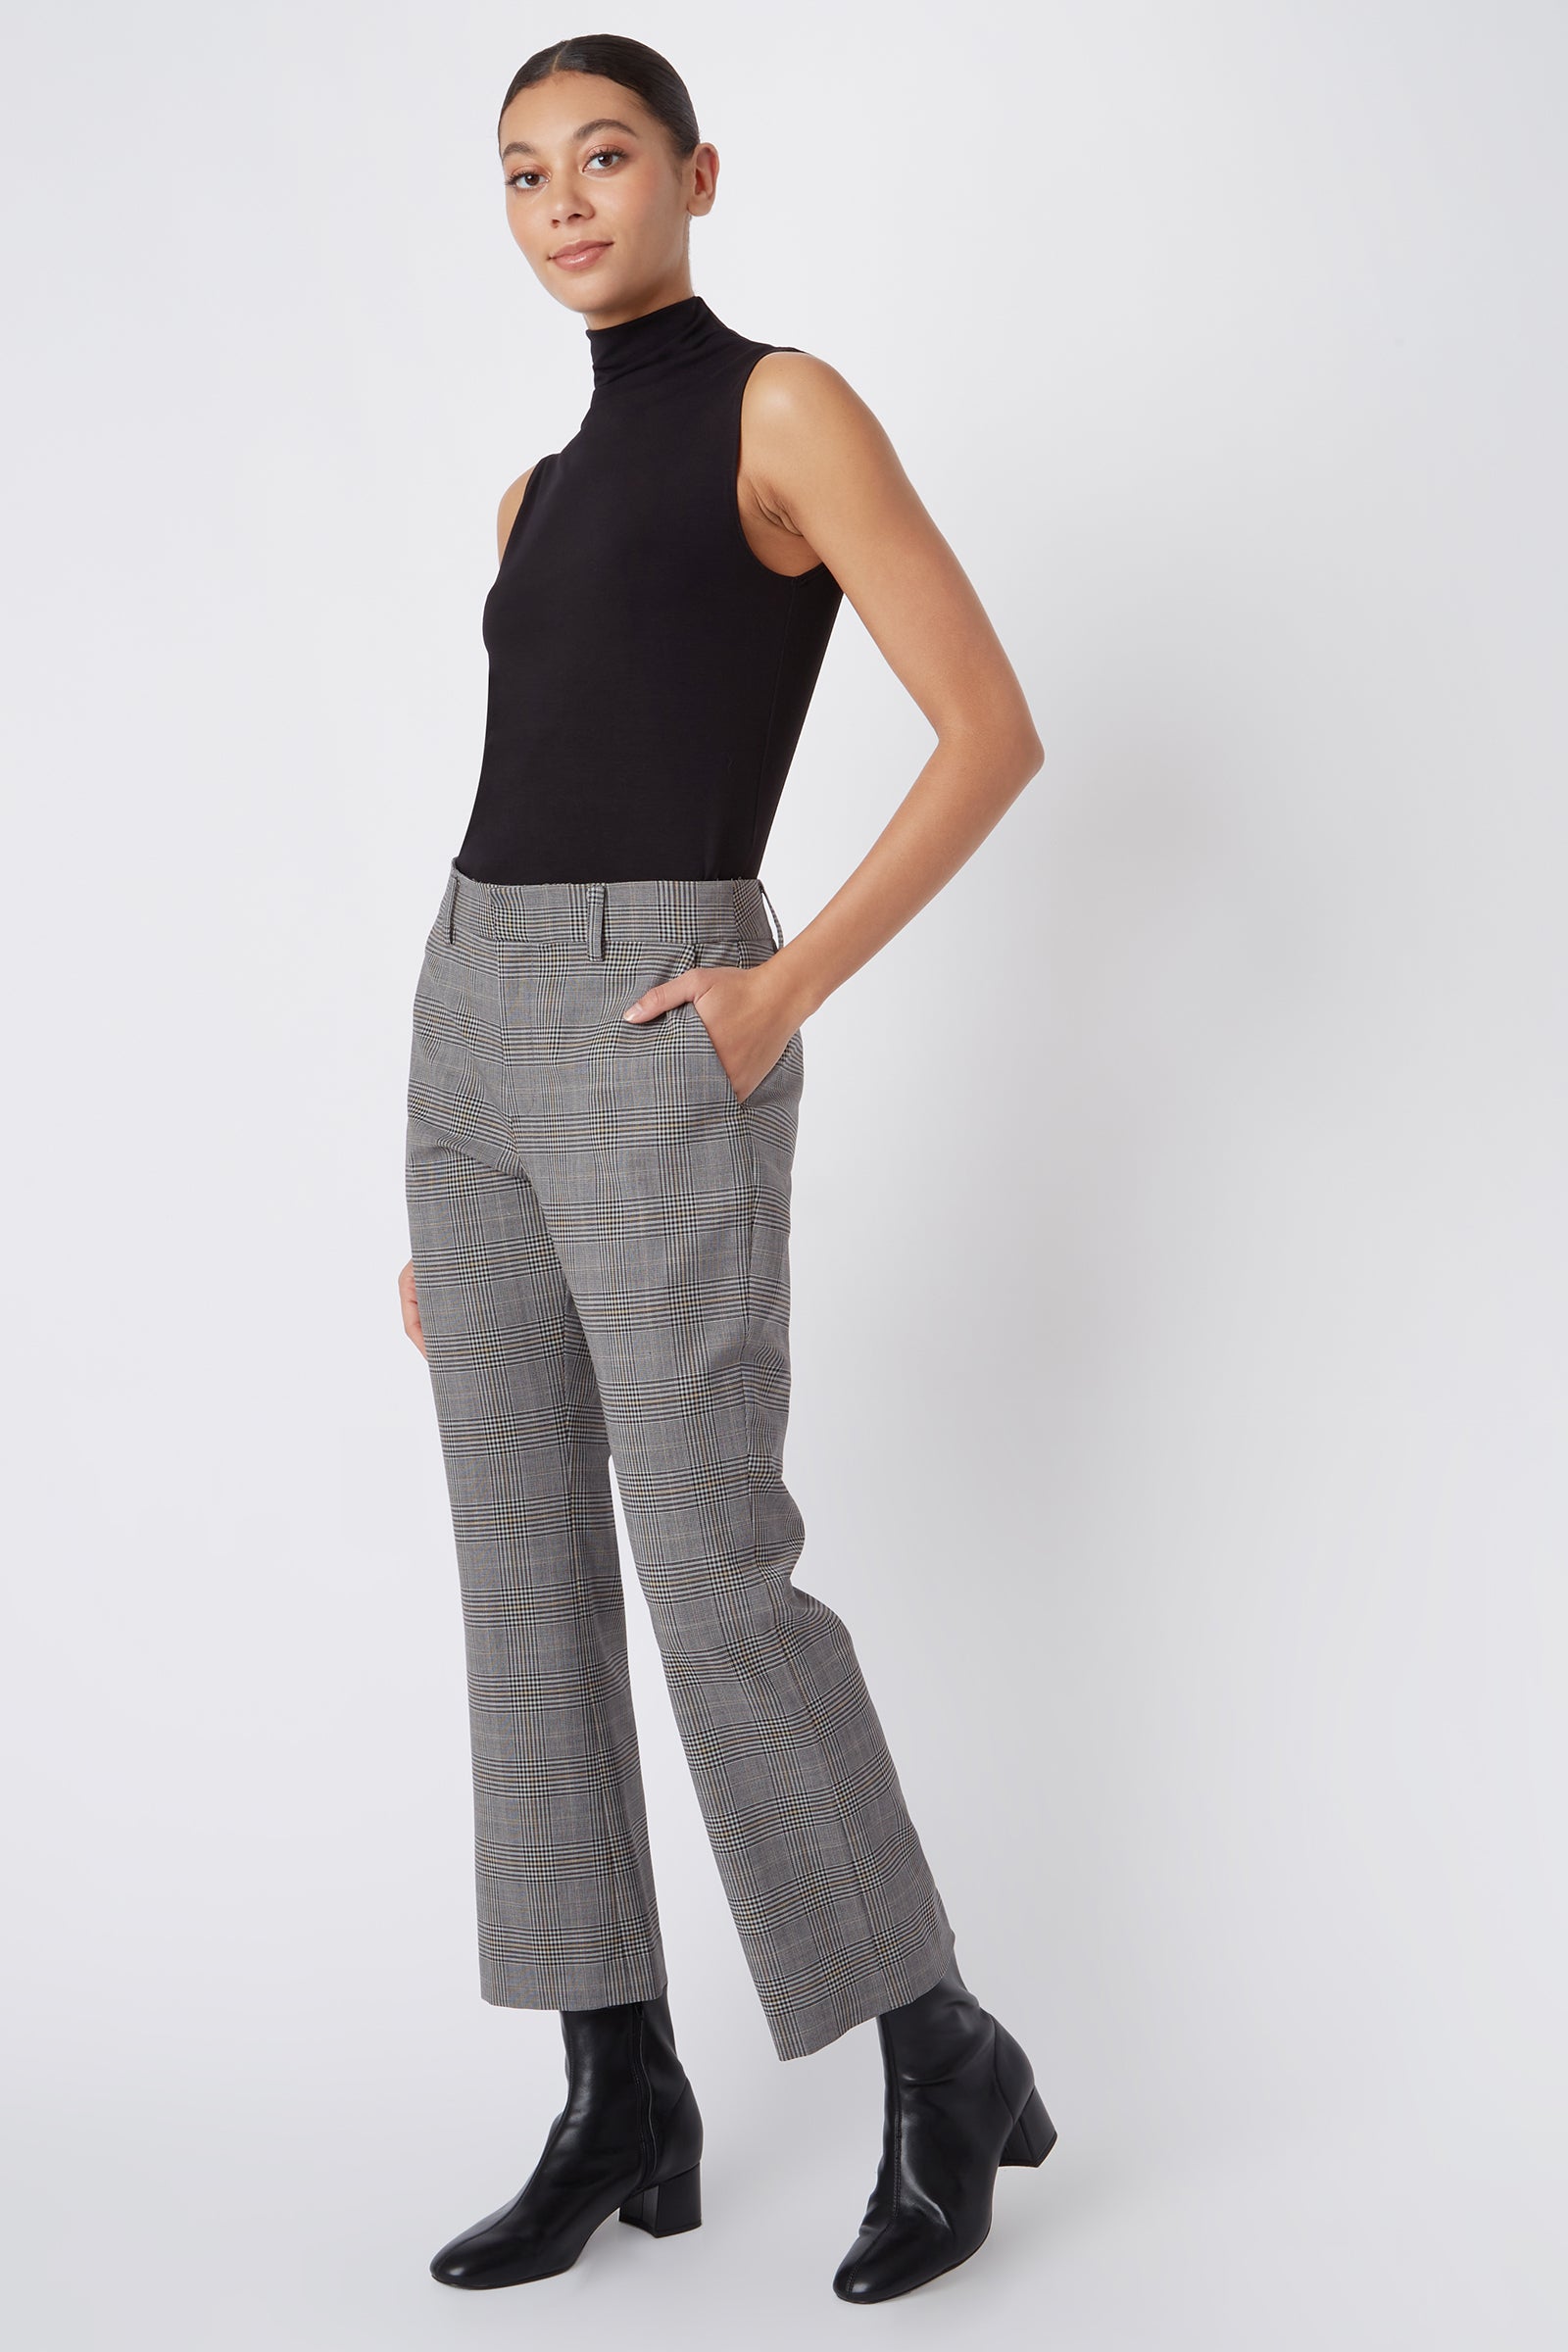 Kal Rieman Francoise Crop Flare in Glen Plaid on Model with Hand in Pocket Full Front View